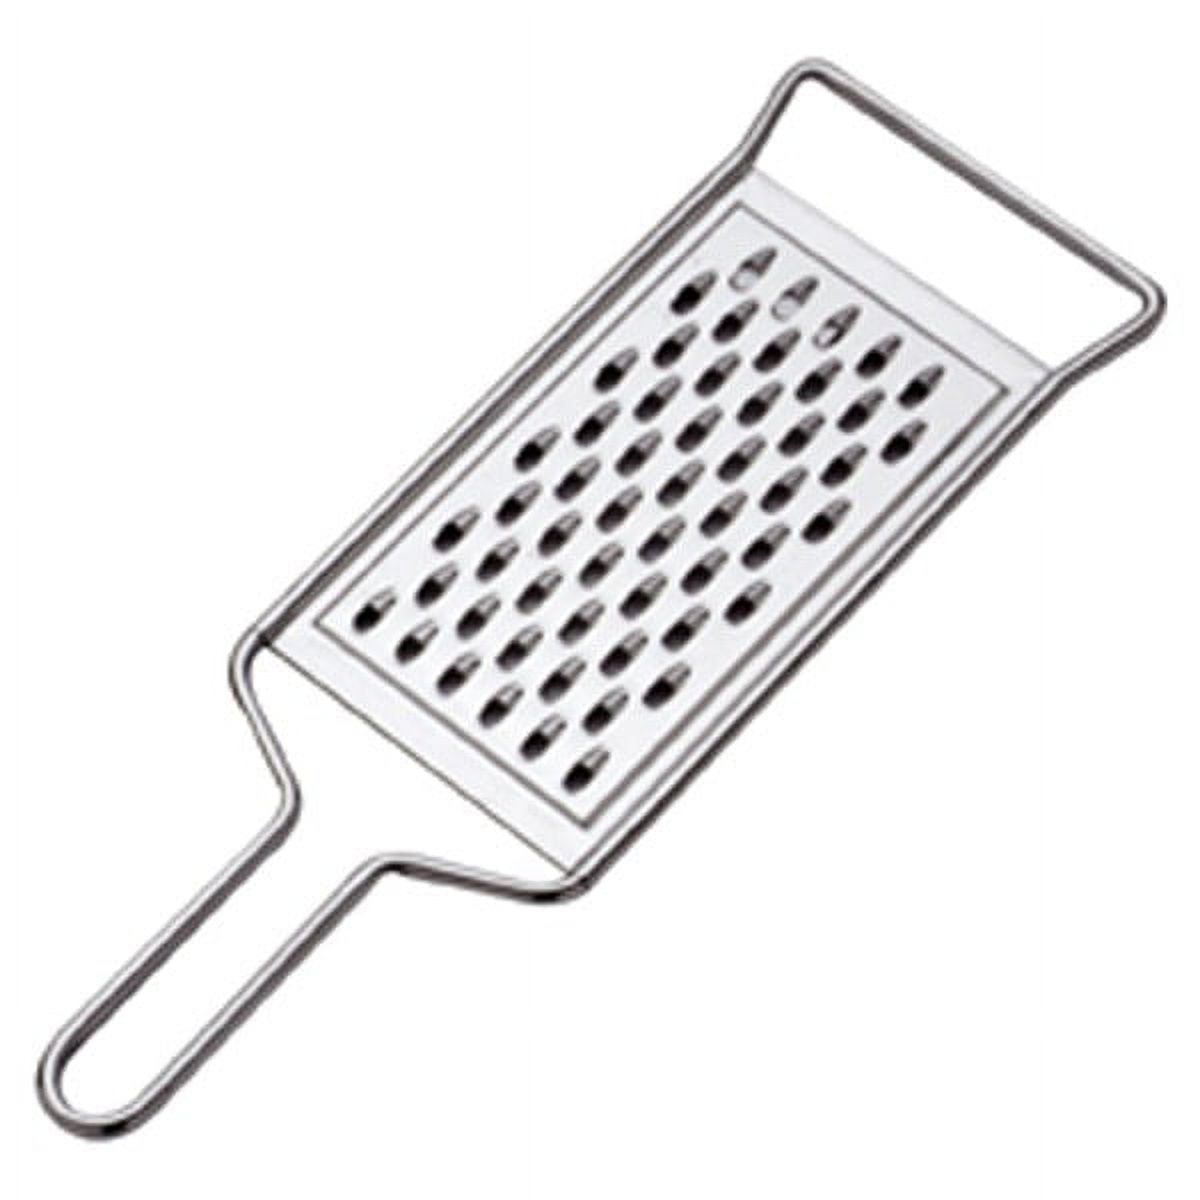 Tramontina Mini Utility Grater in Stainless Steel with Black Polypropylene Handle 25640100